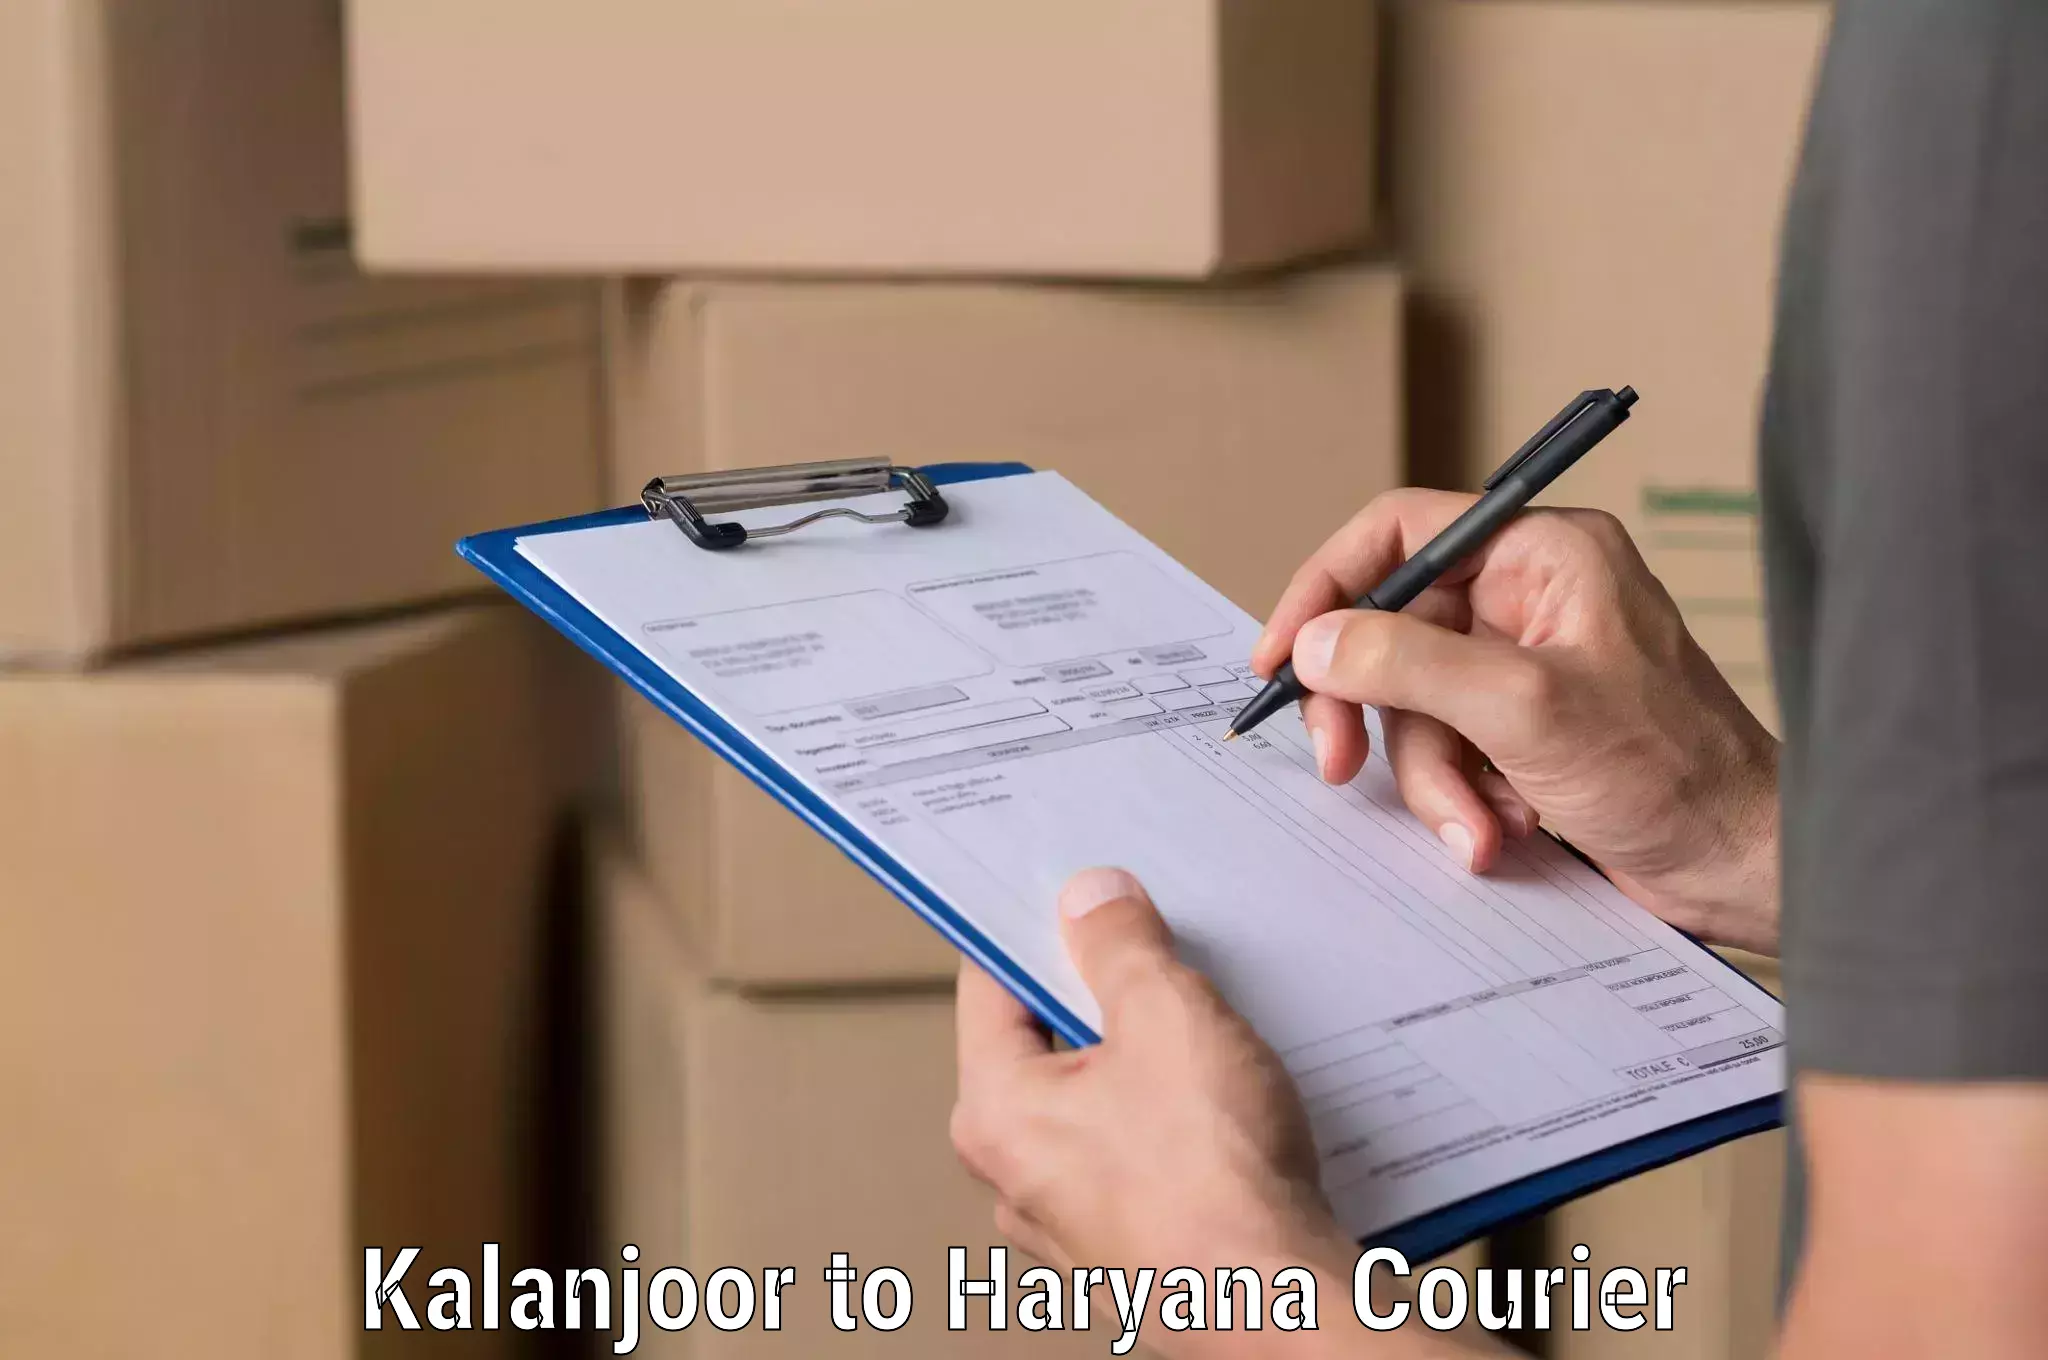 Cost-effective courier options Kalanjoor to Chaudhary Charan Singh Haryana Agricultural University Hisar